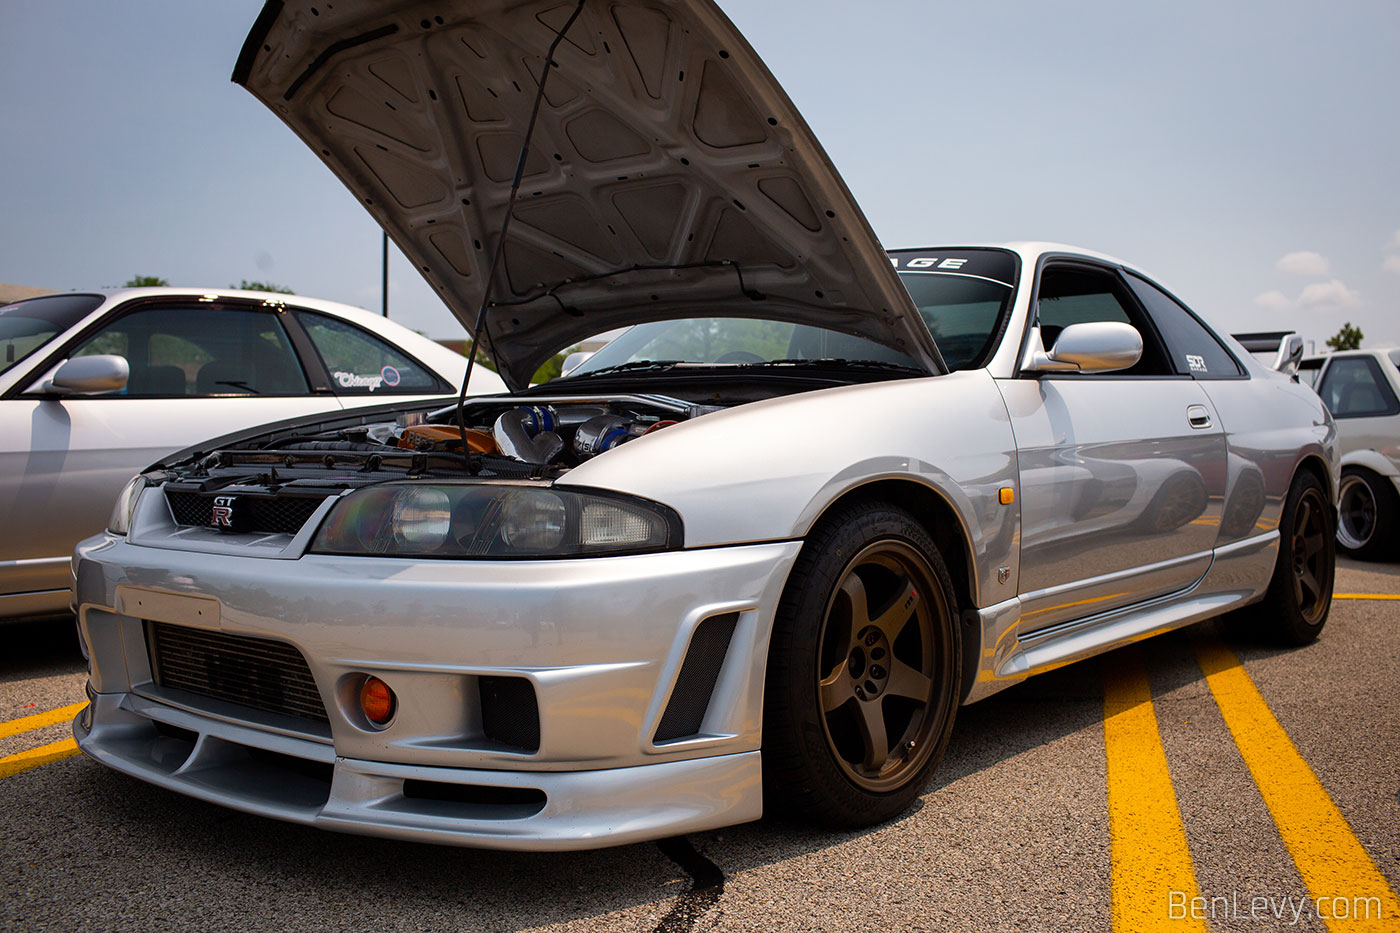 Nismo Front Bumper and Wheels on Nissan Skylie GT-R